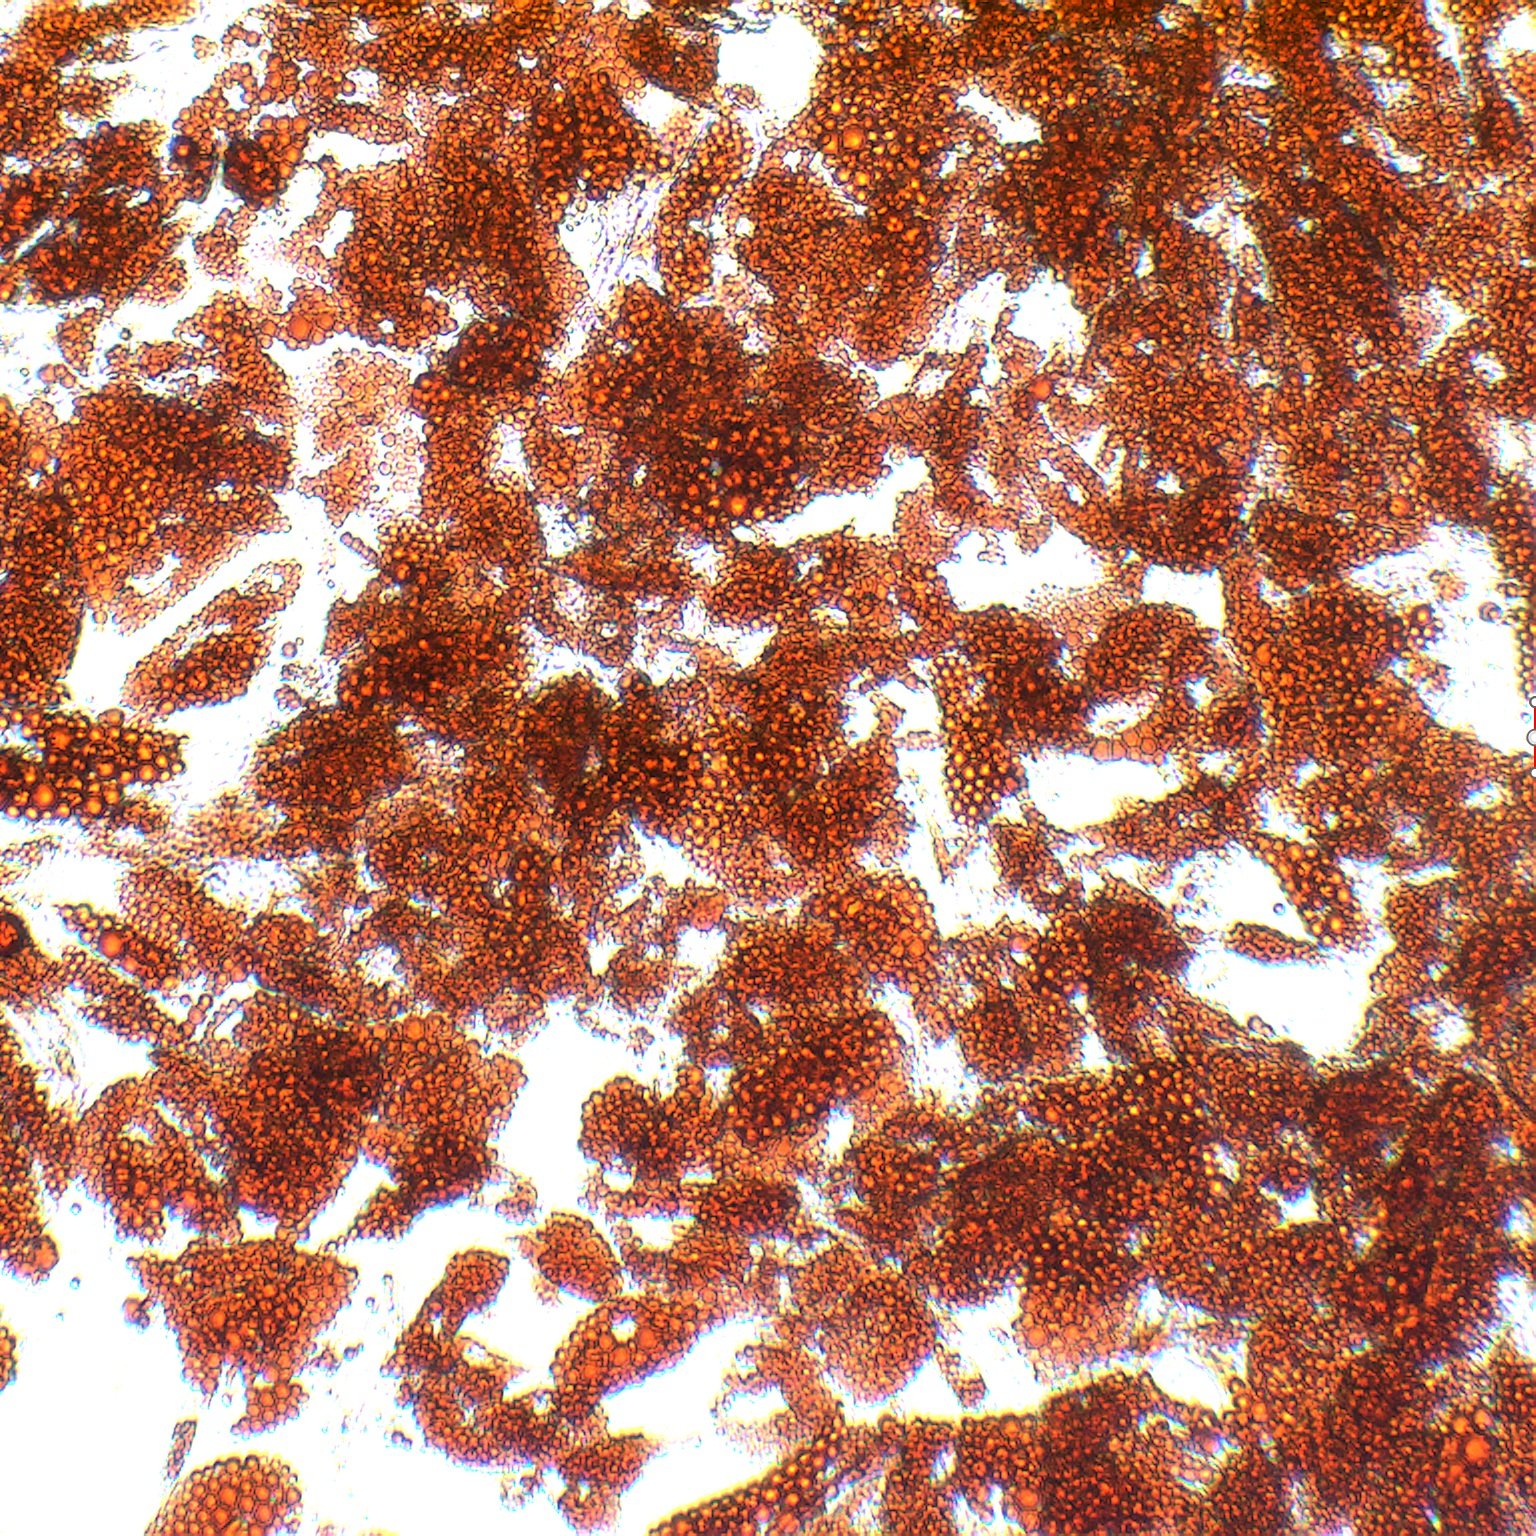  Adipose-derived stem cells differentiated into pre-adipocytes with AdipoQual. Lipids stained with Oil Red O. 